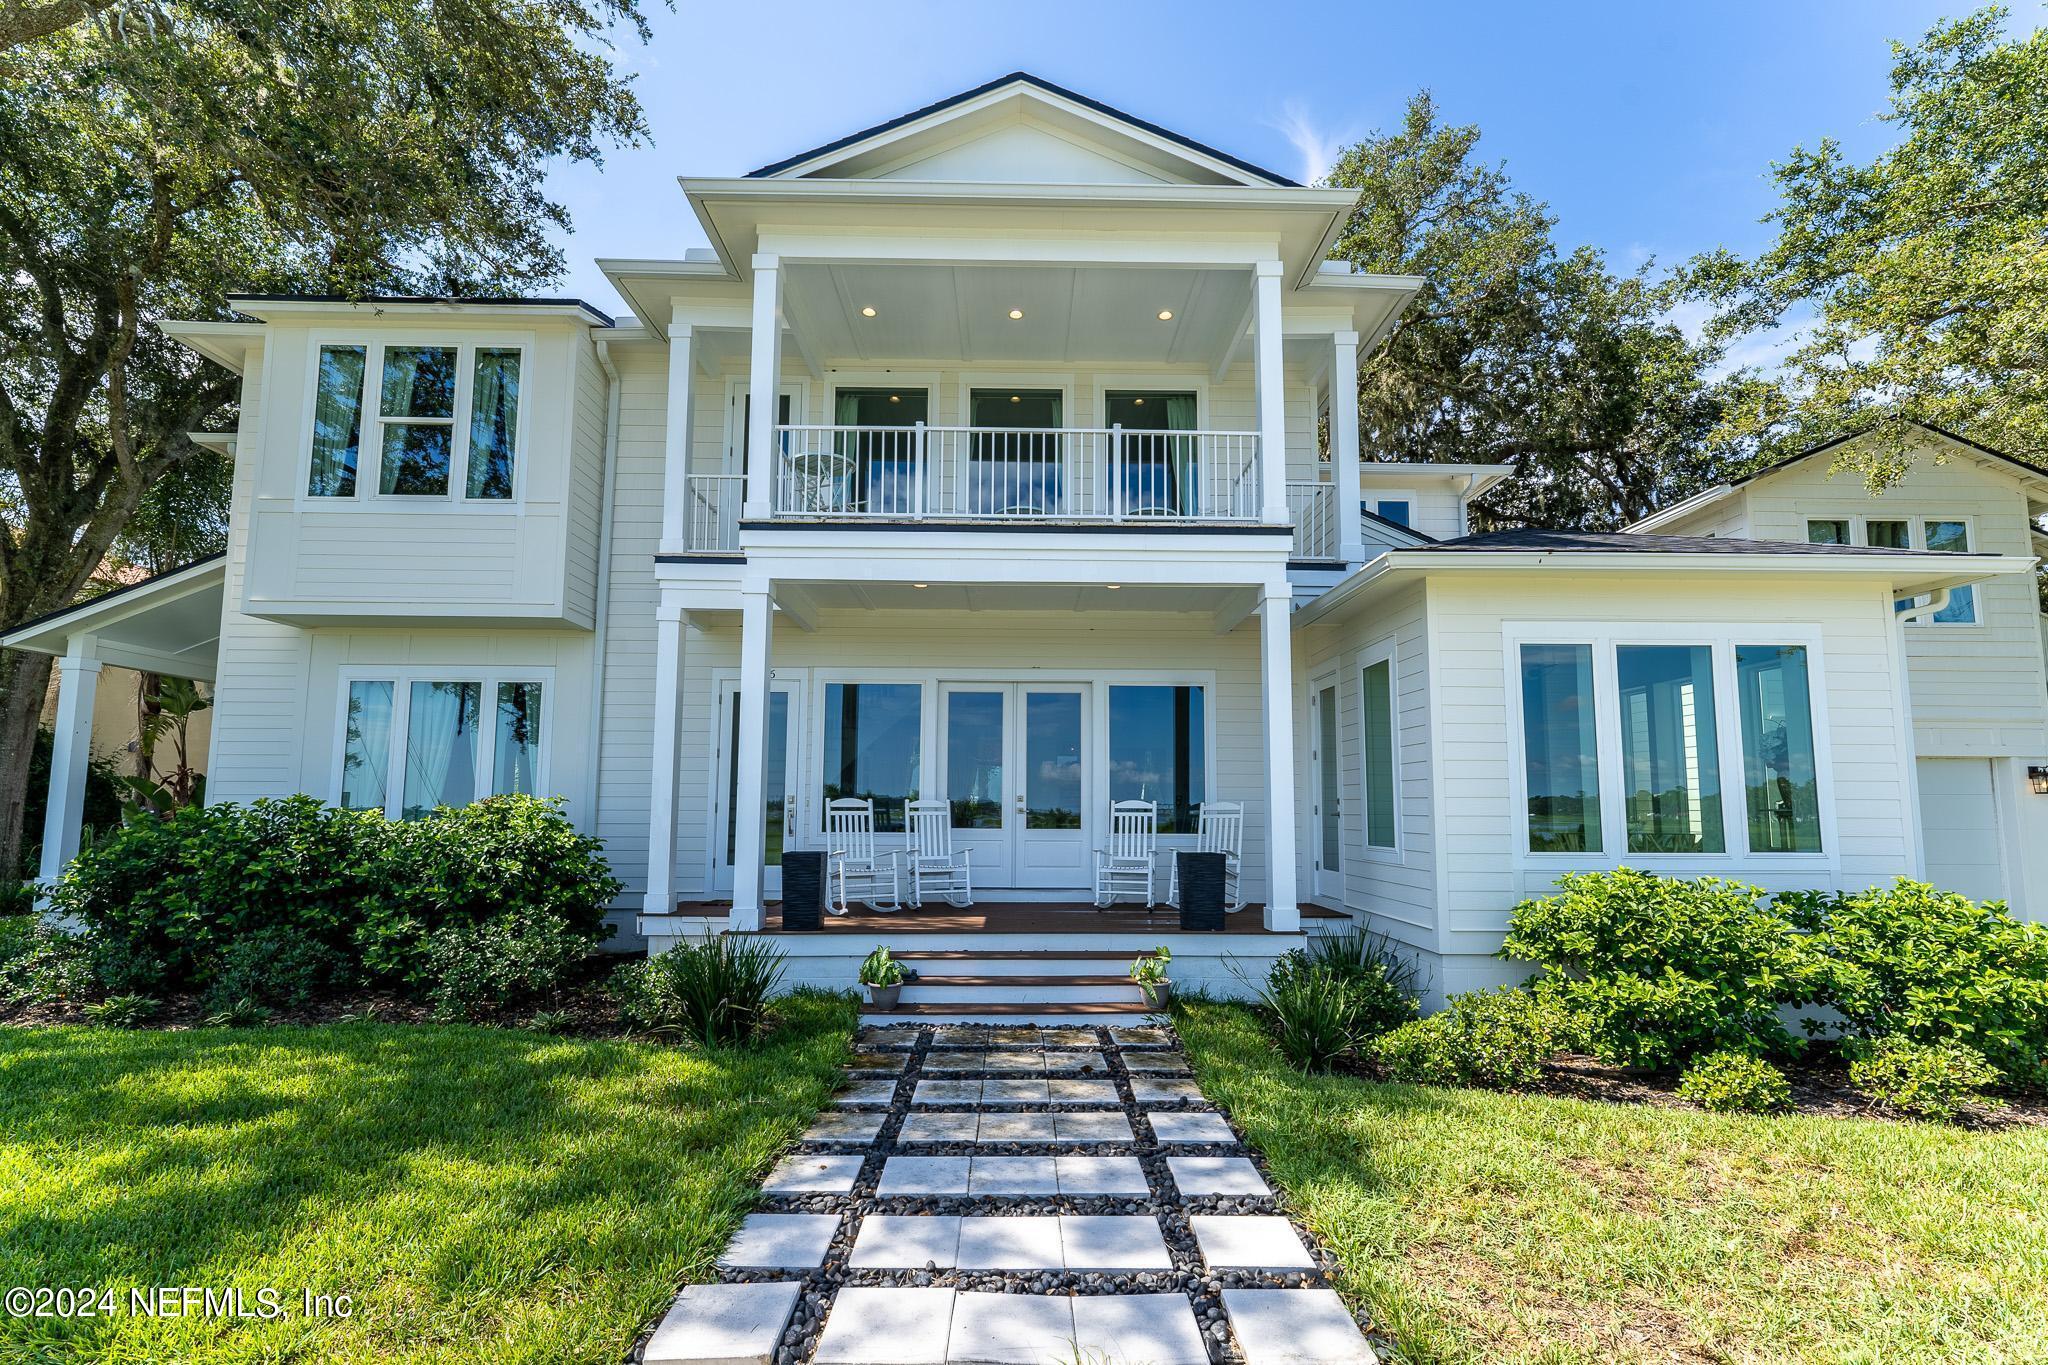 2406 Shore Drive, St Augustine, Florida, 32086, United States, 4 Bedrooms Bedrooms, ,5 BathroomsBathrooms,Residential,For Sale,2406 Shore Drive,1456461